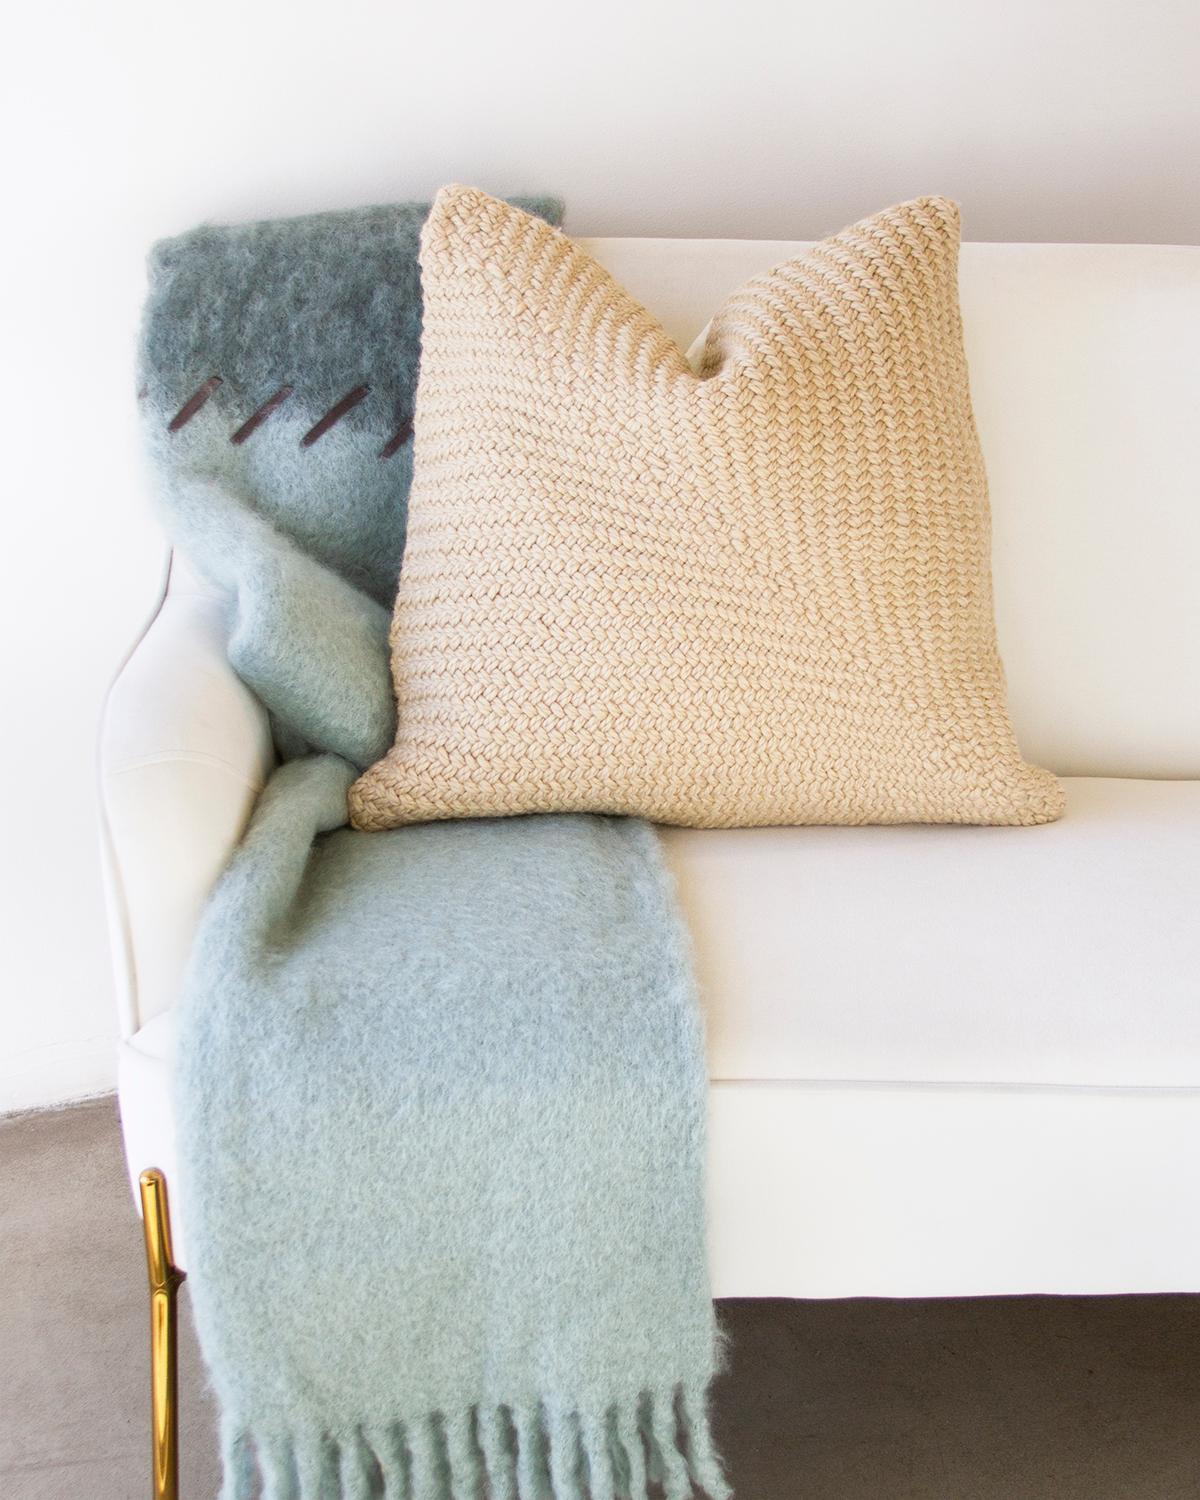 Add some texture with this warm wool pillow. Introduce cozy, quiet luxury into your home decor with our Trigo Wool Throw Pillow in Beige. Handmade with natural wool, this throw pillow features a beautiful herringbone knit pattern, perfect for adding